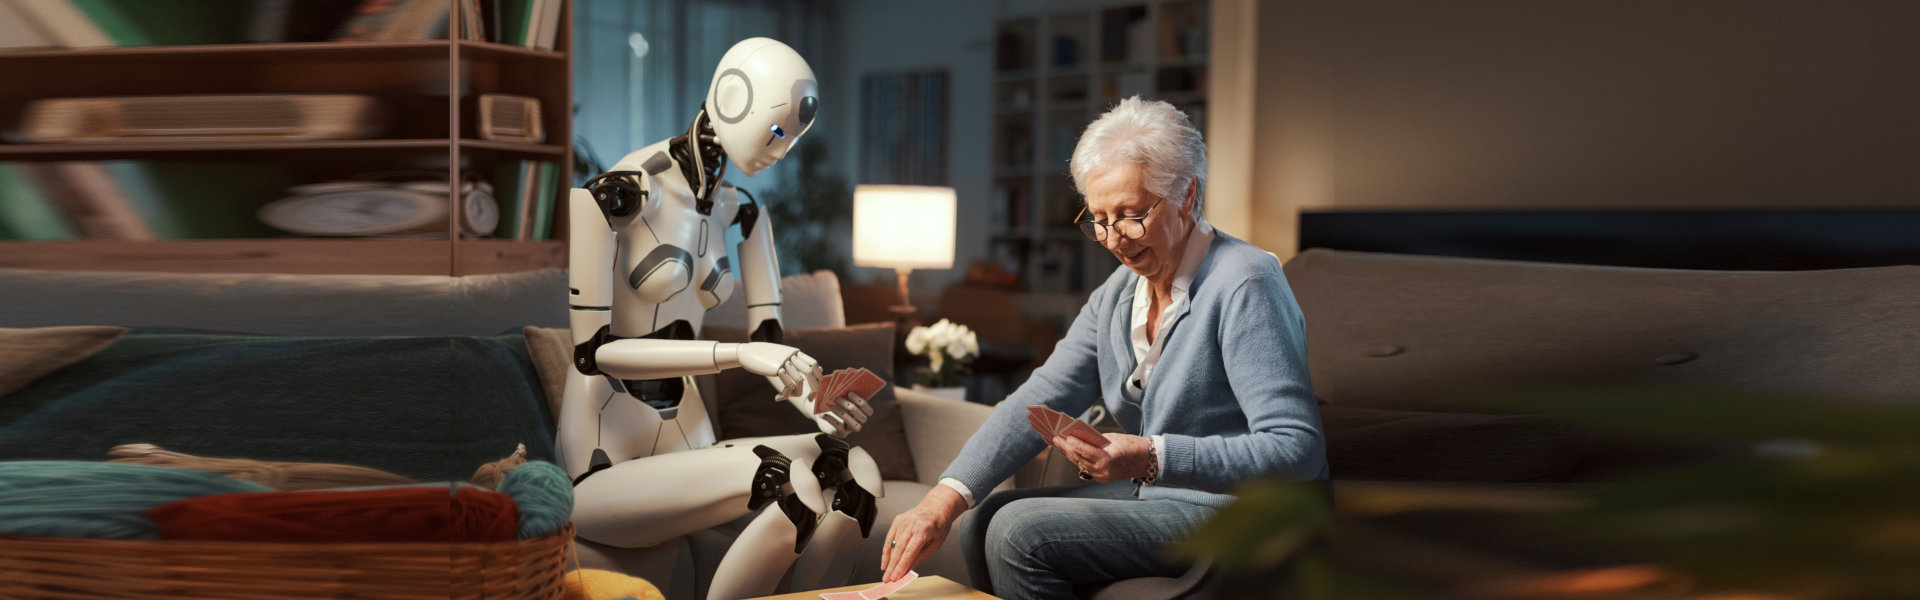 A robot is playing with an old lady.